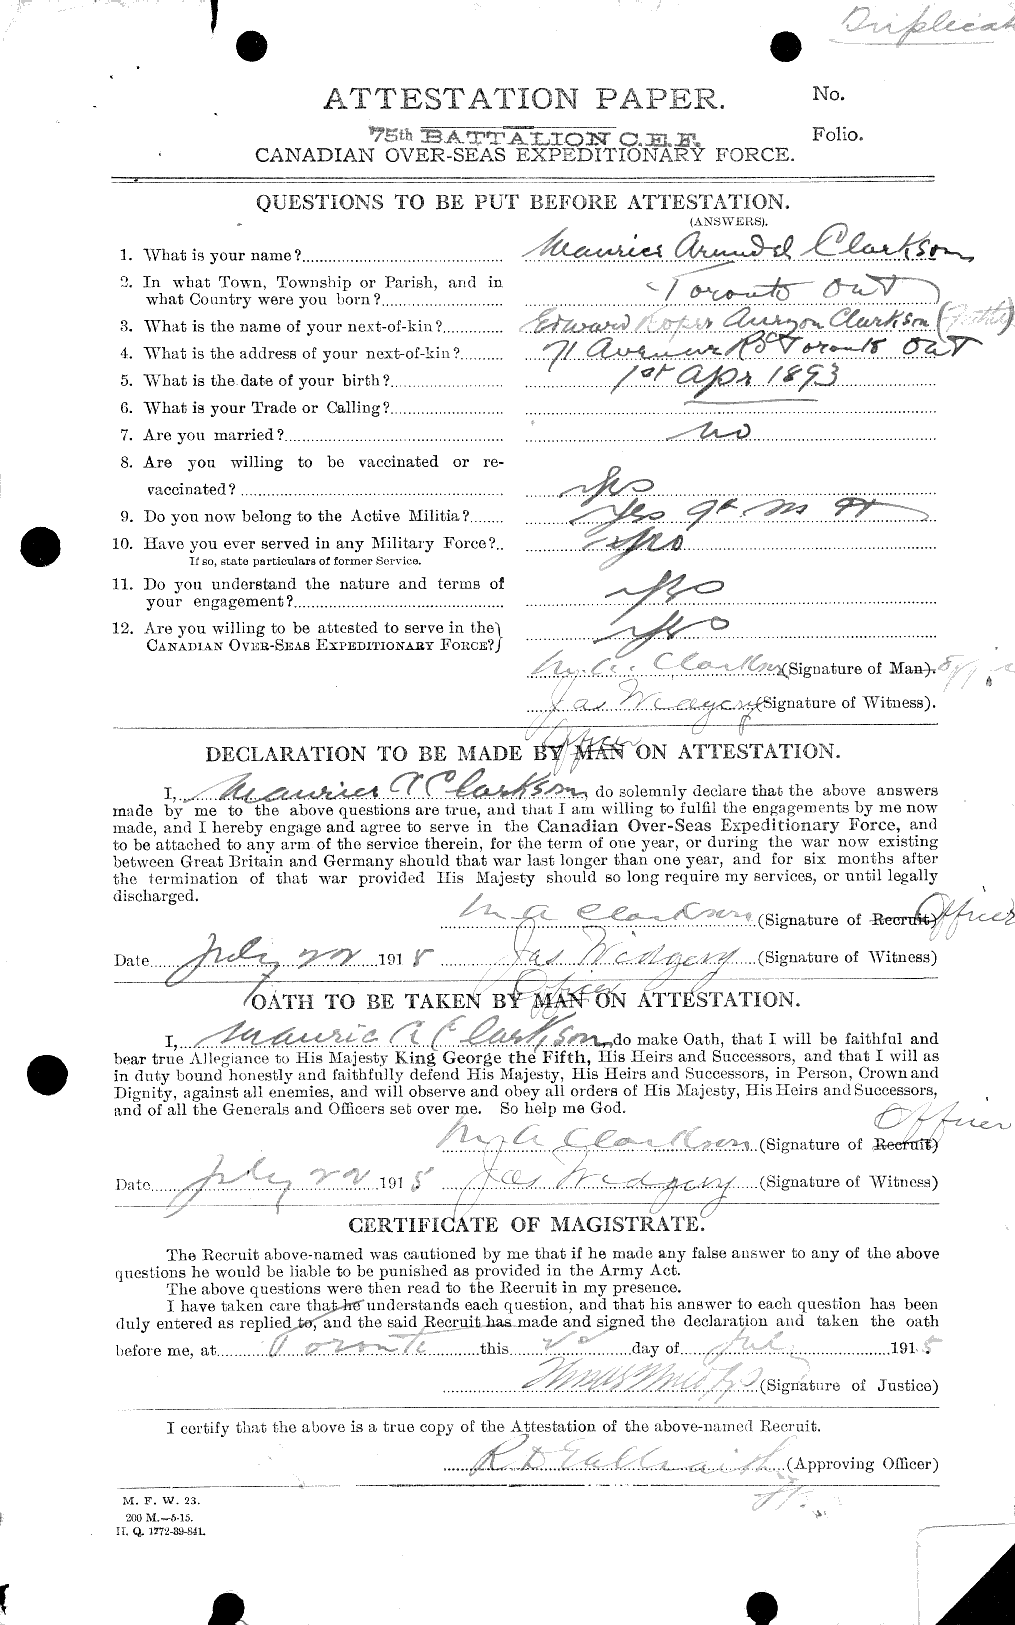 Personnel Records of the First World War - CEF 021463a